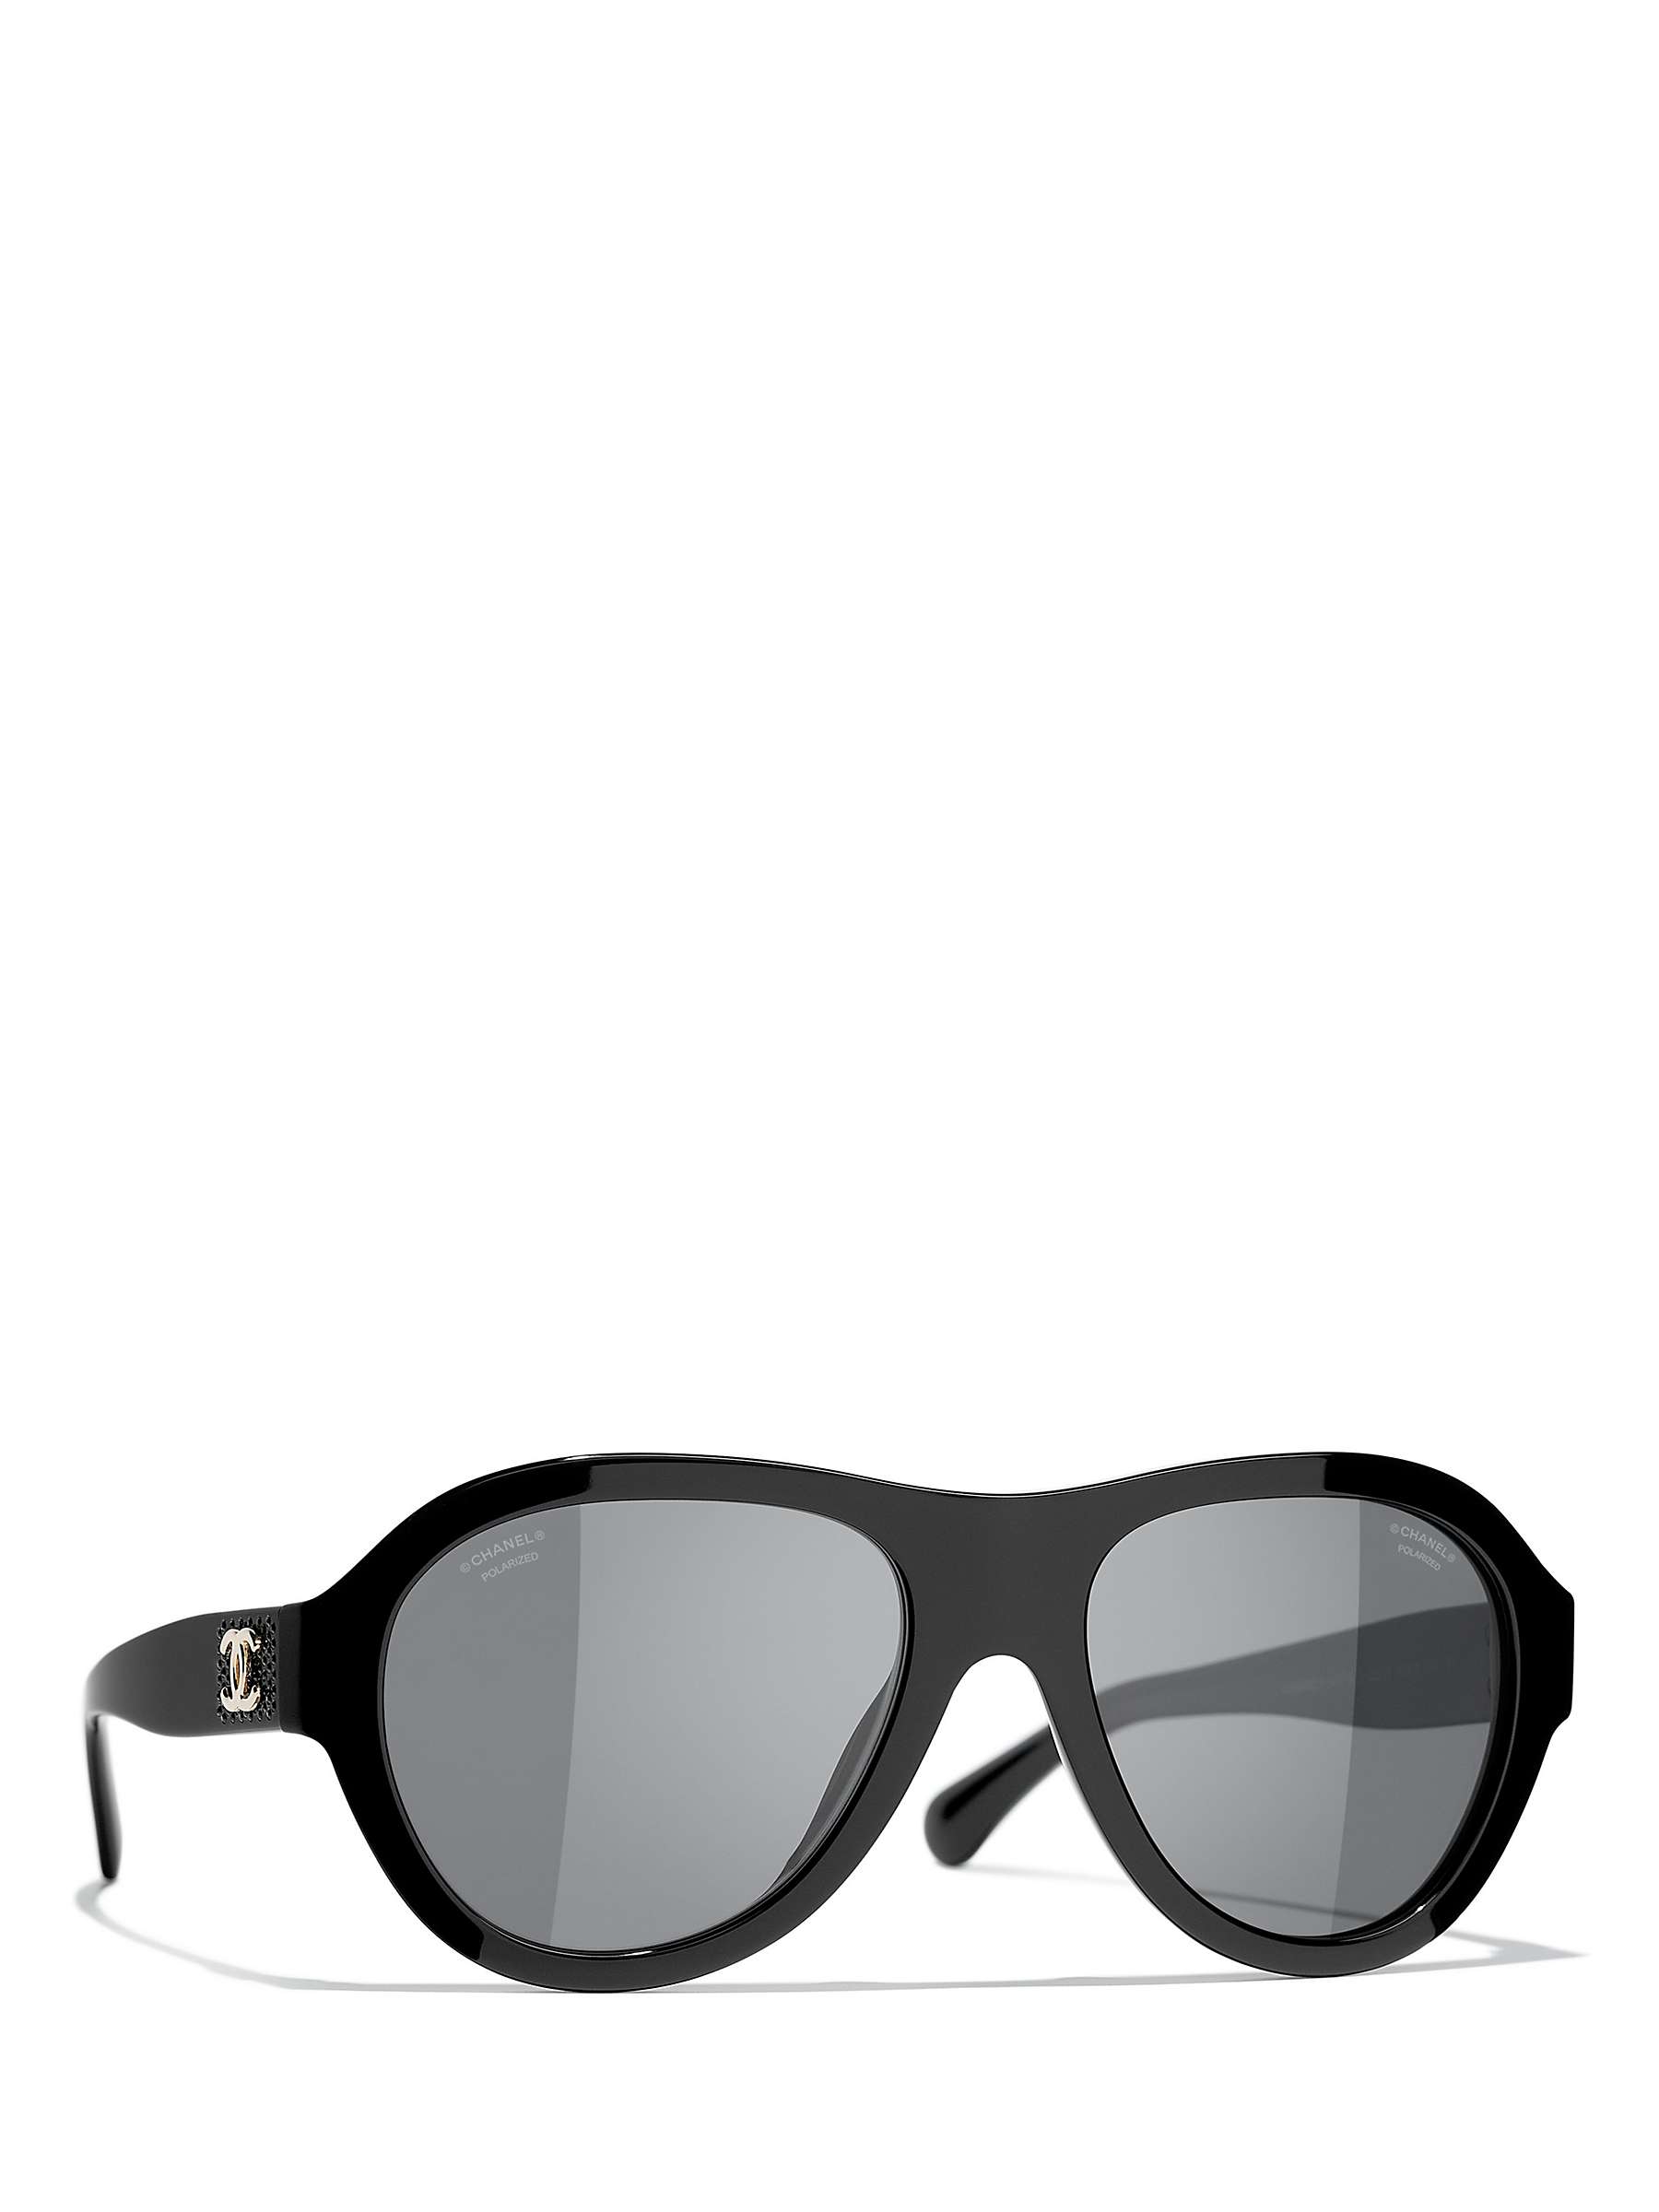 Buy CHANEL Oval Sunglasses CH5467B Black/Grey Online at johnlewis.com